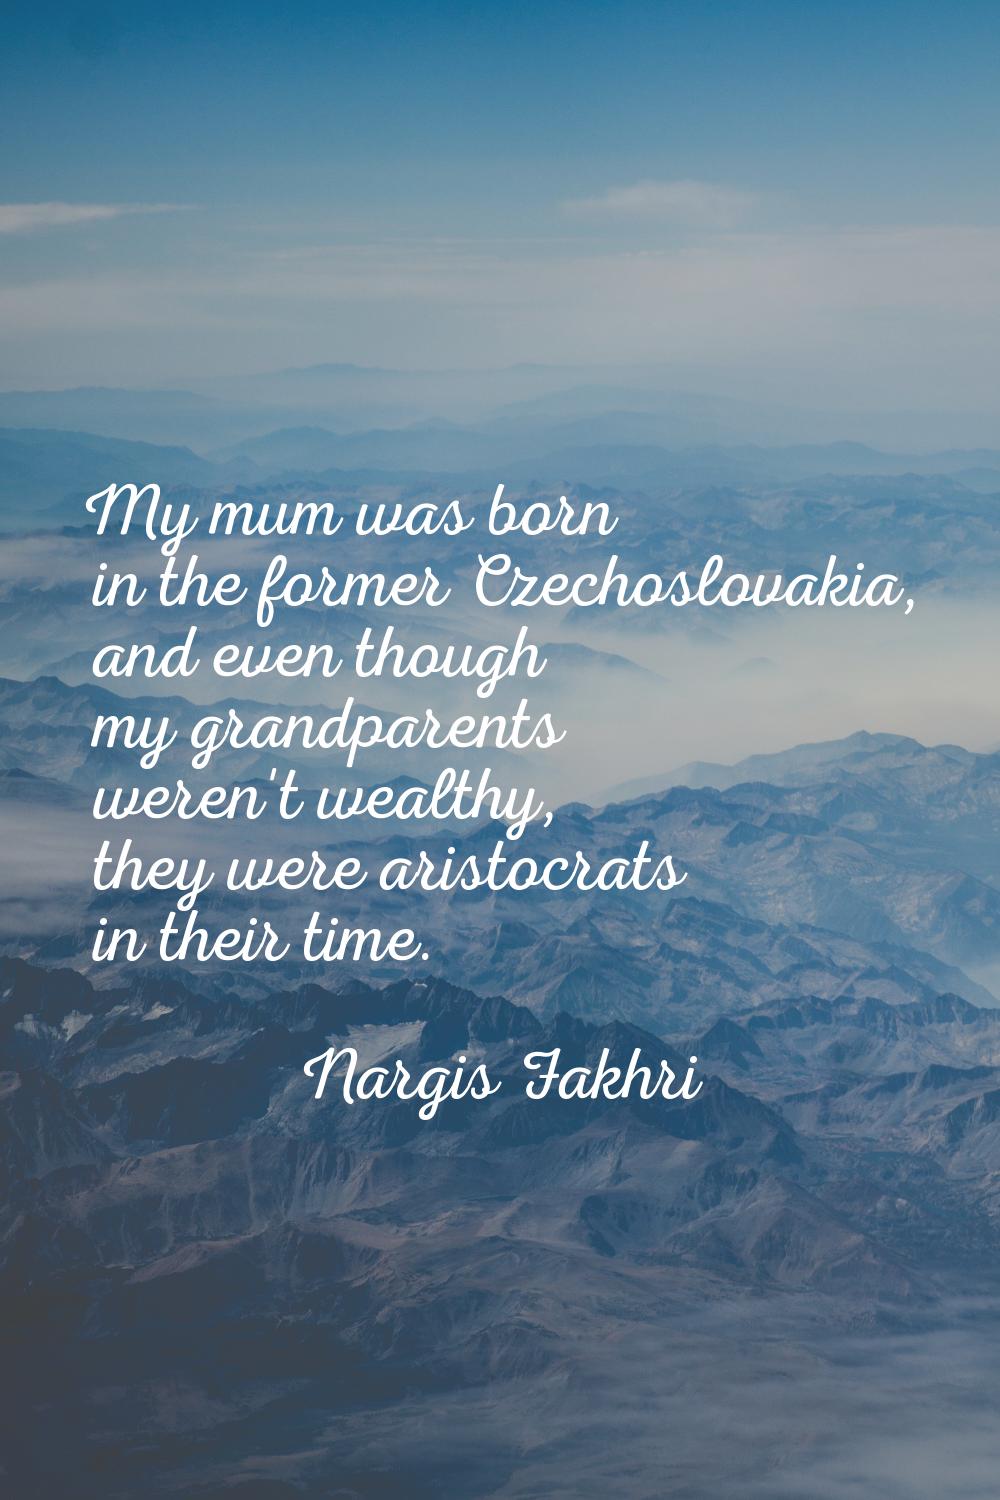 My mum was born in the former Czechoslovakia, and even though my grandparents weren't wealthy, they